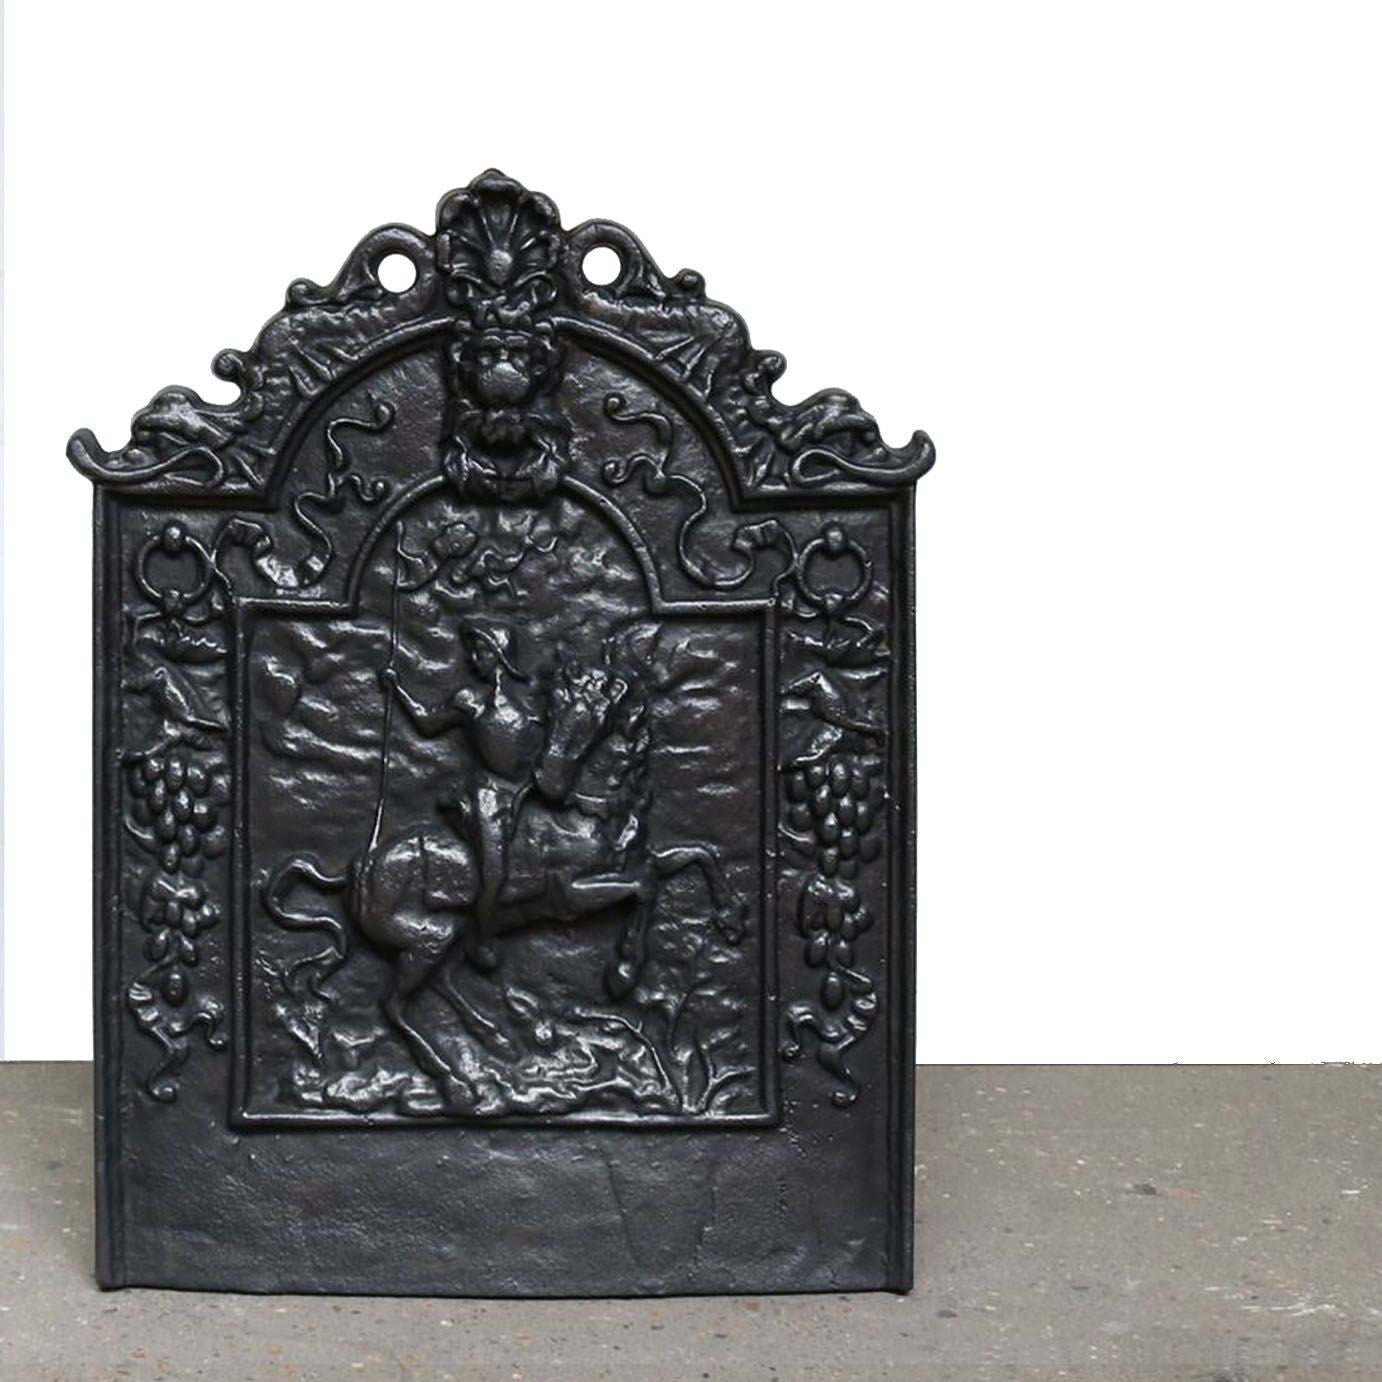 Antique Reclaimed Cast Iron Fireback | The Architectural Forum